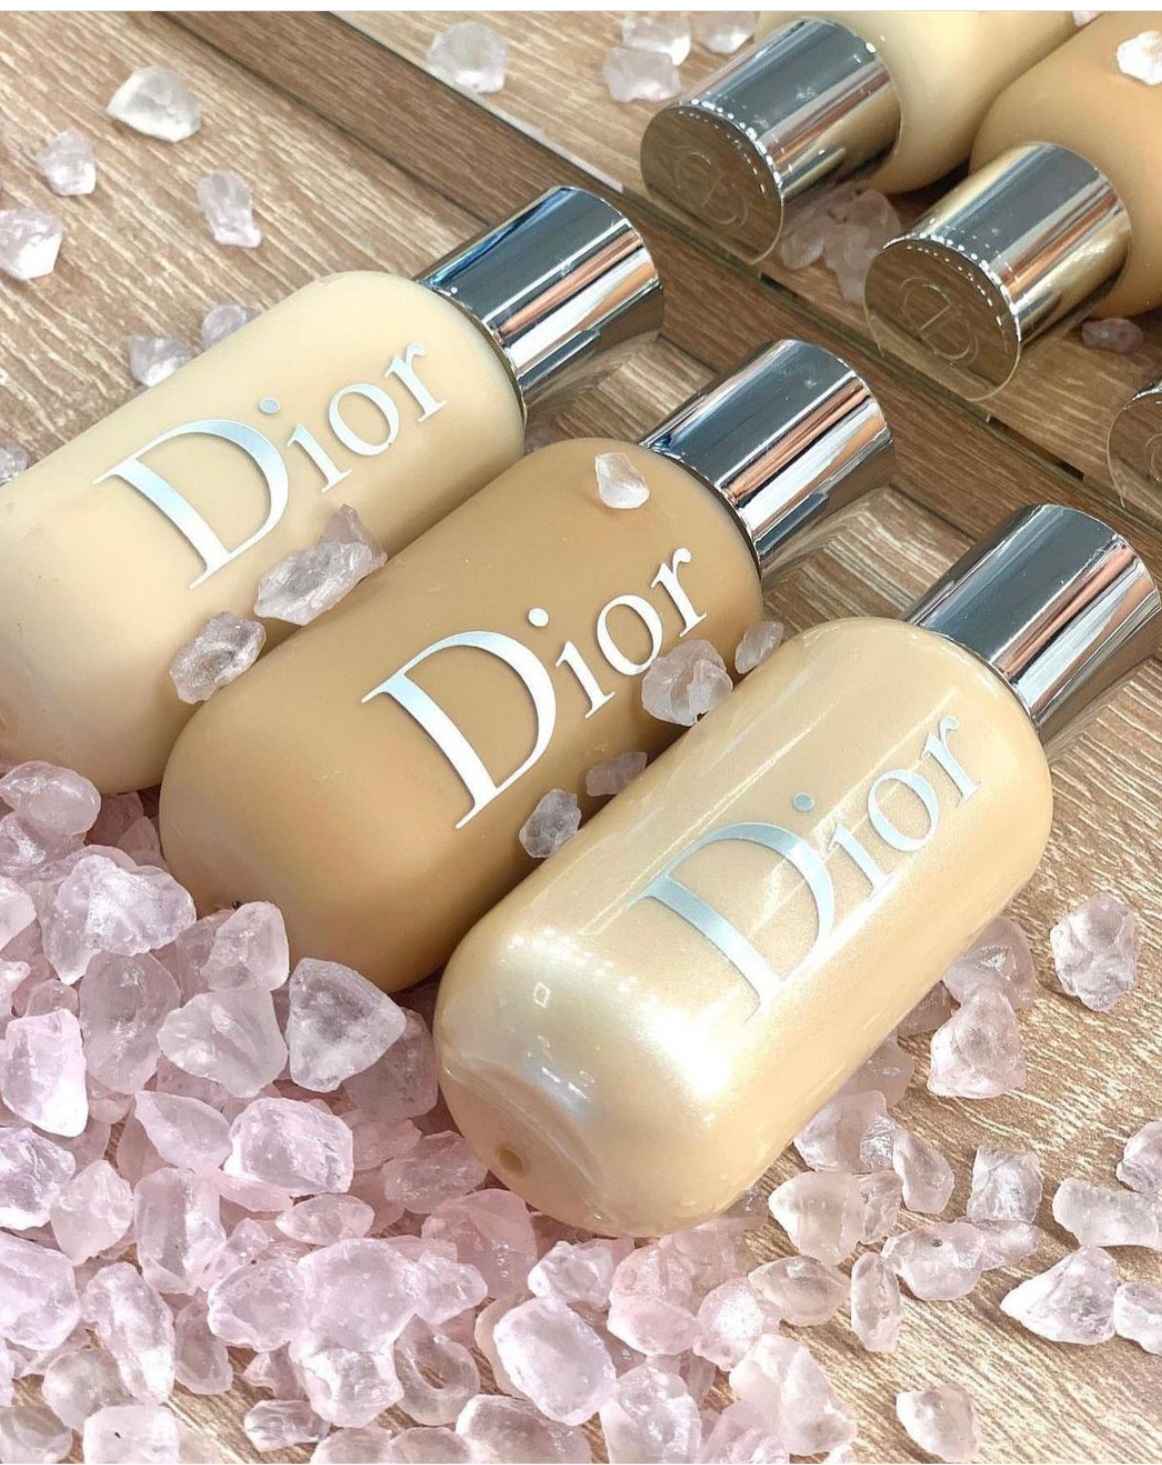 DIOR BACKSTAGE FACE AND BODY FOUNDATION 